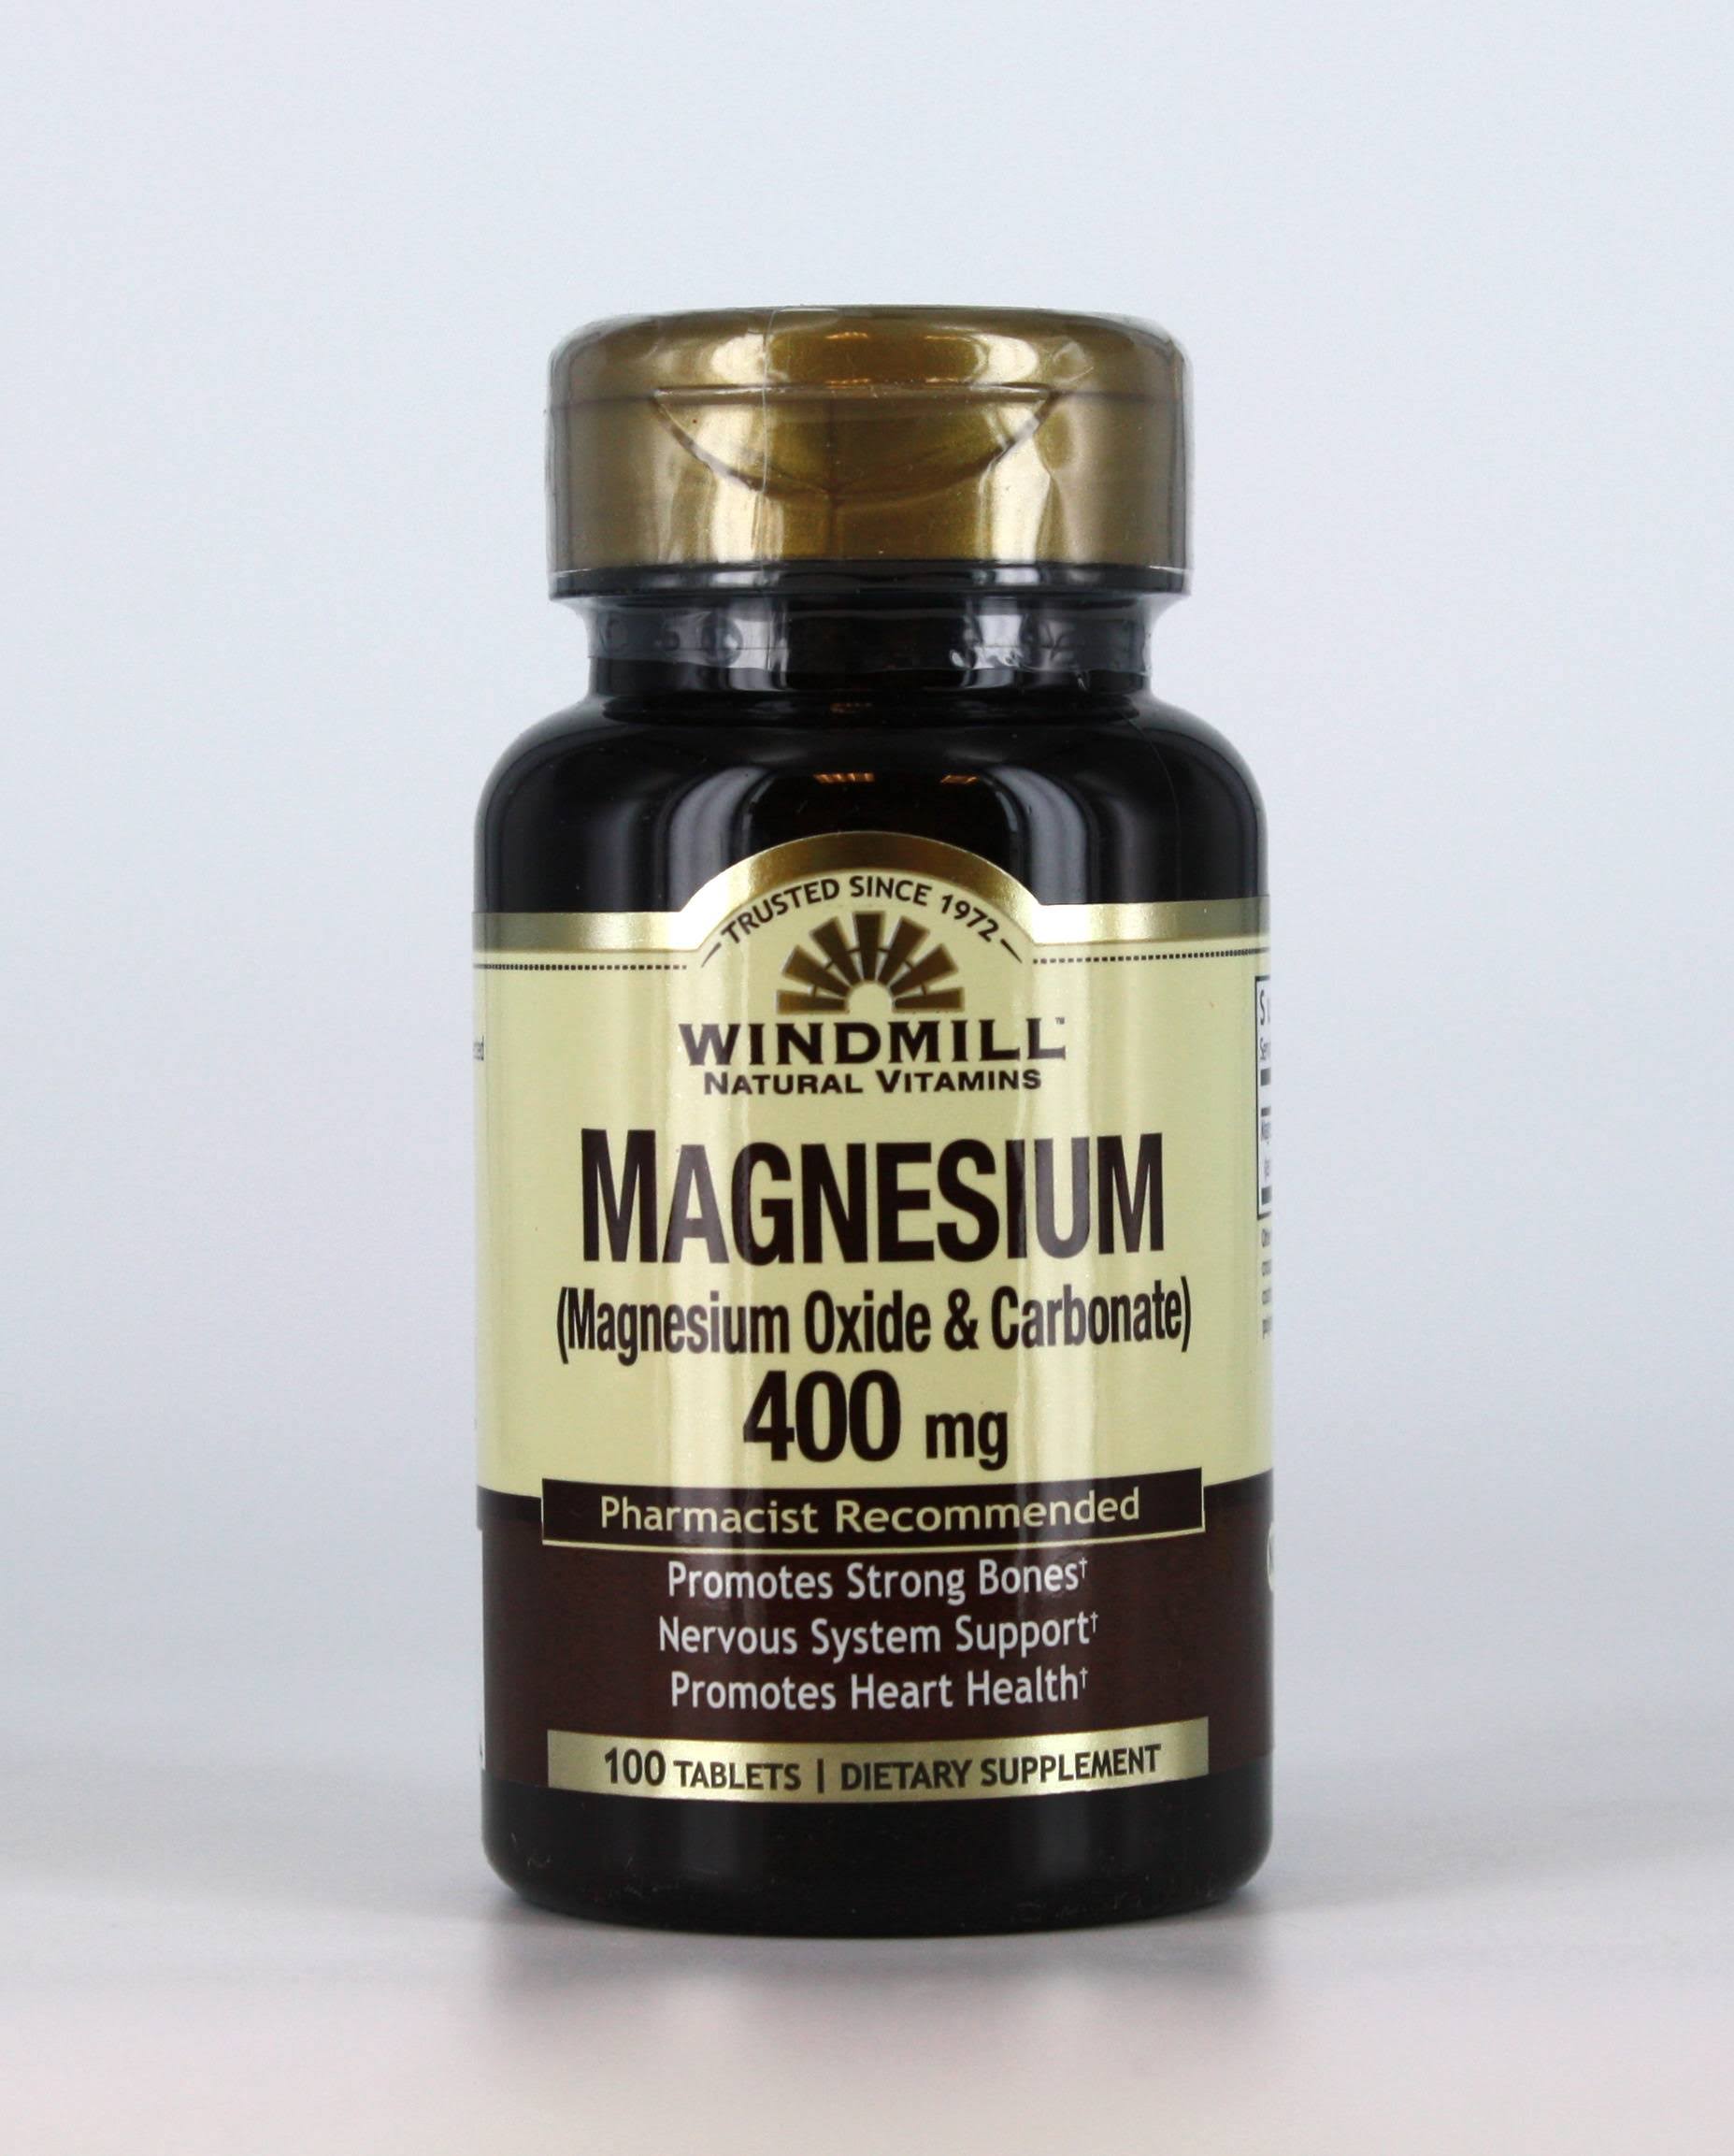 Windmill Vitamin Magnesium Oxide 400mg Dietary Supplement - 100 Tablets